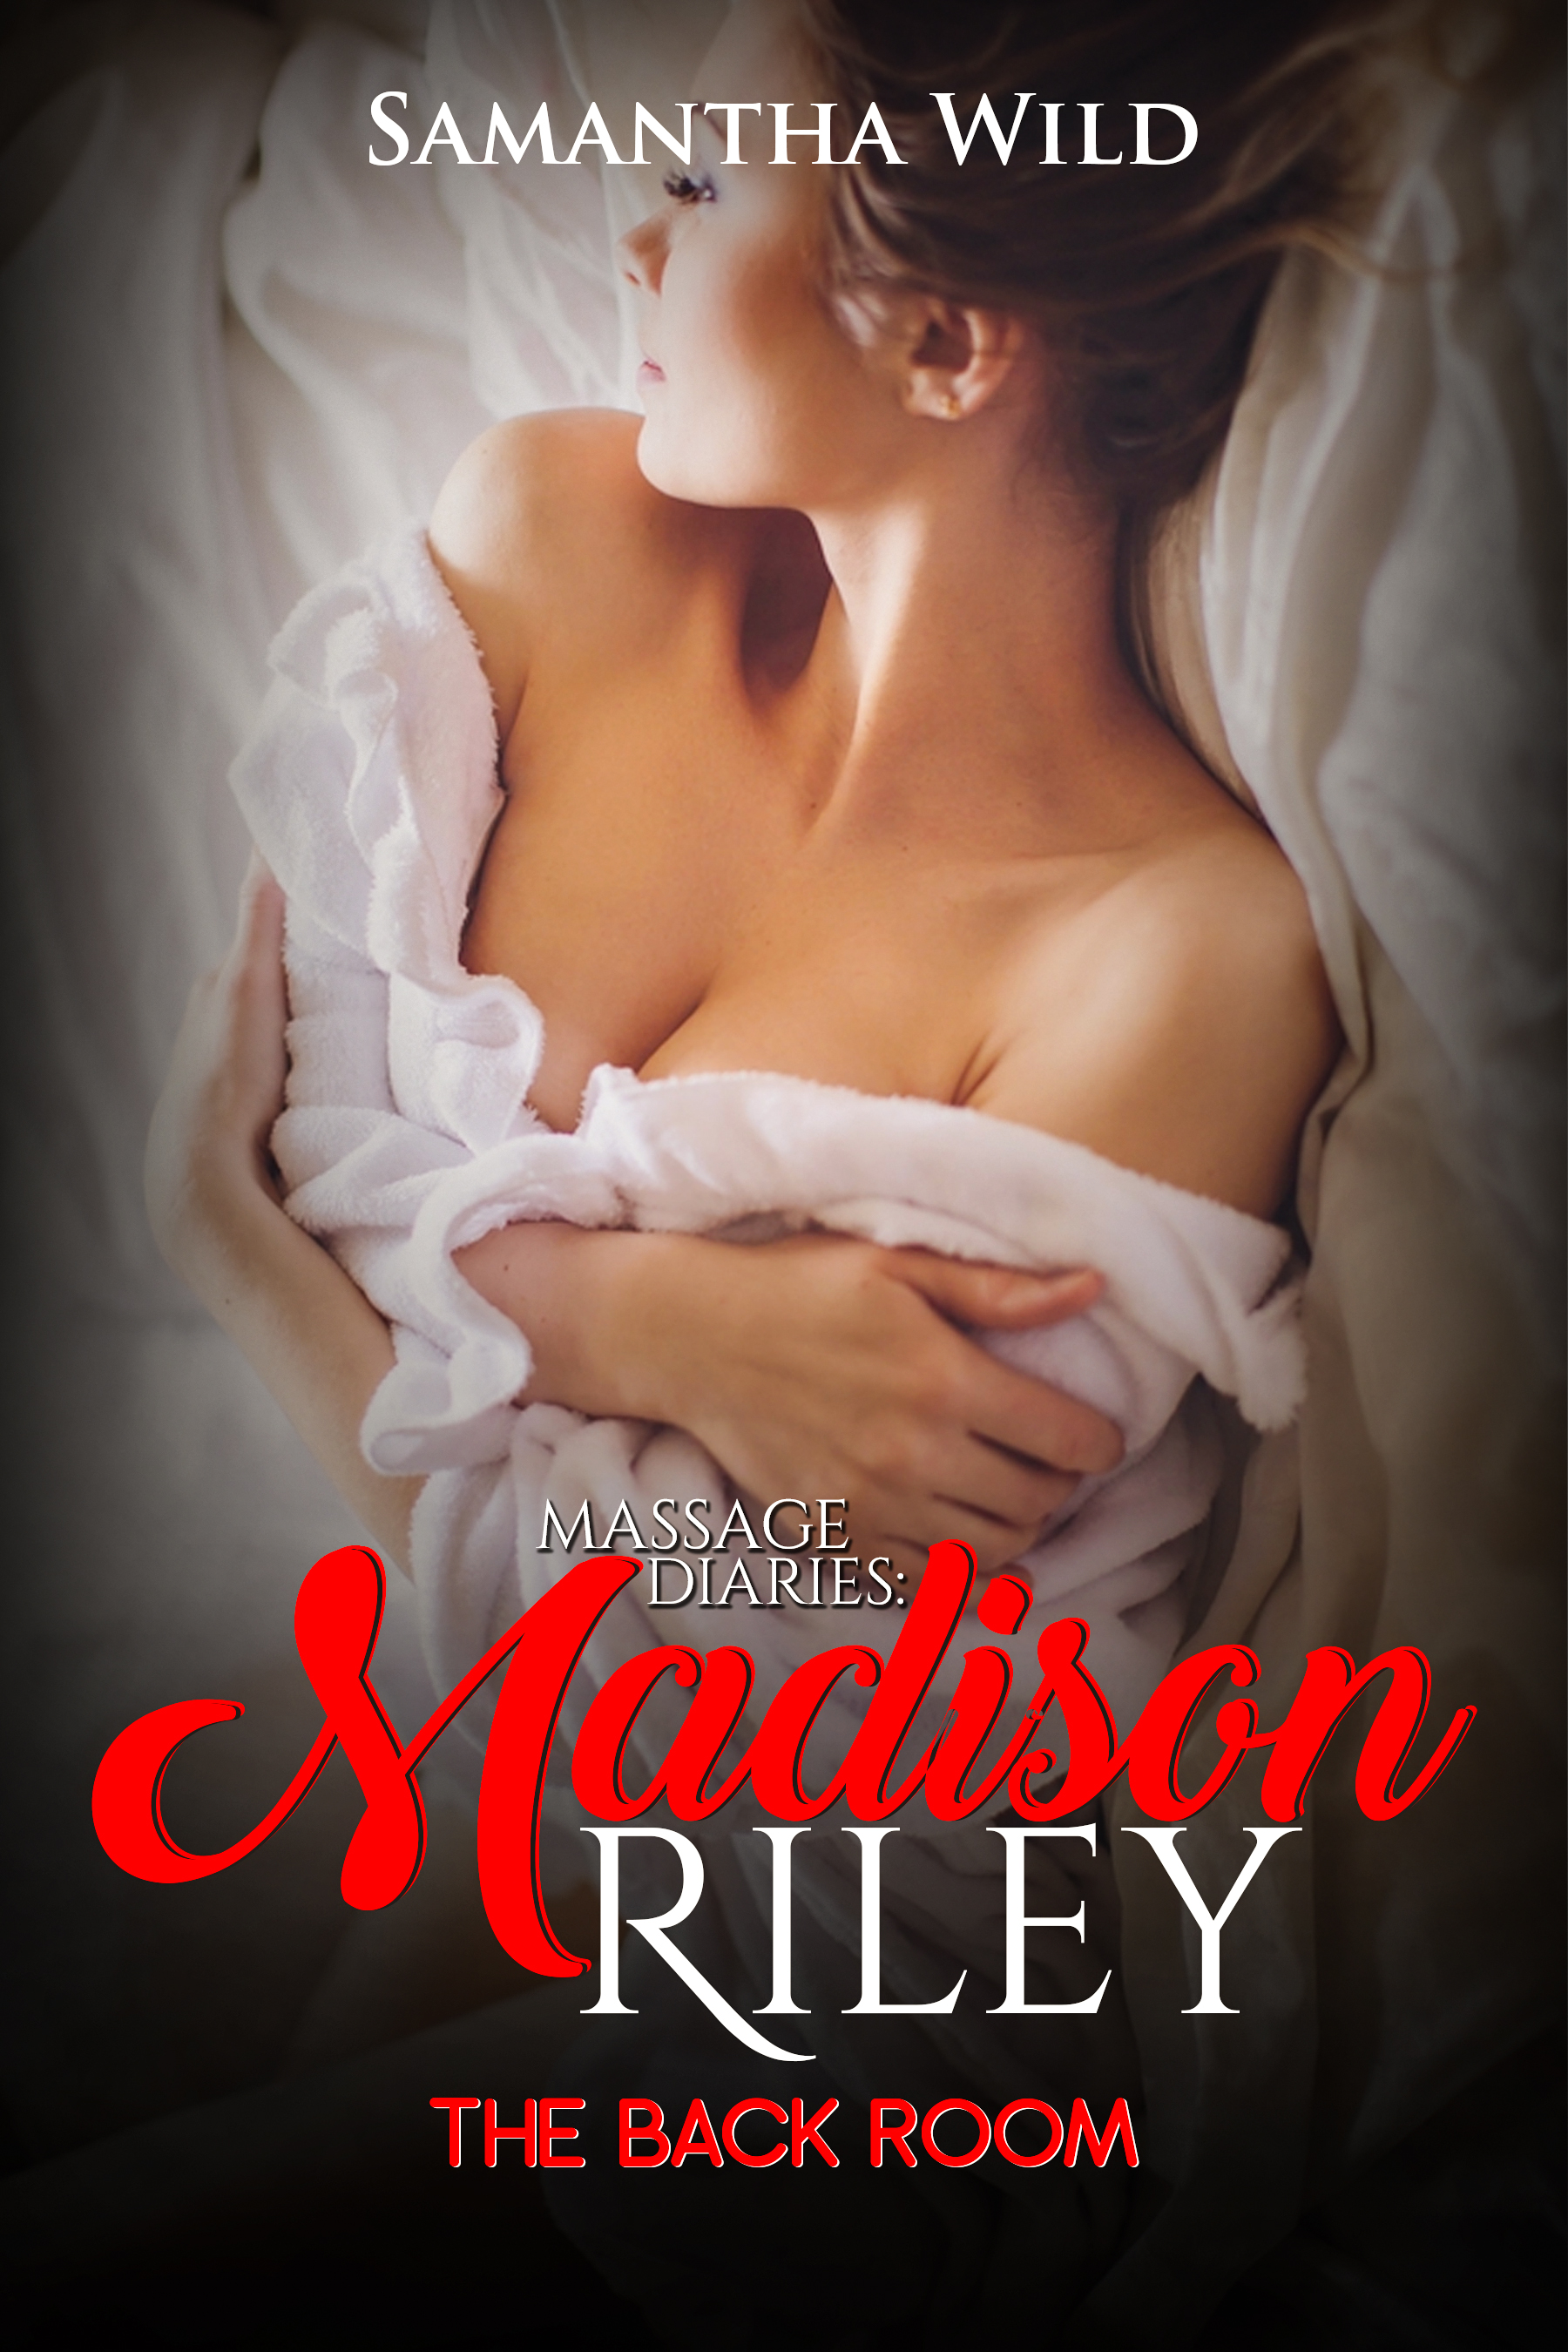 FREE: Massage Diaries: Madison Riley: The Back Room by Samantha Wild